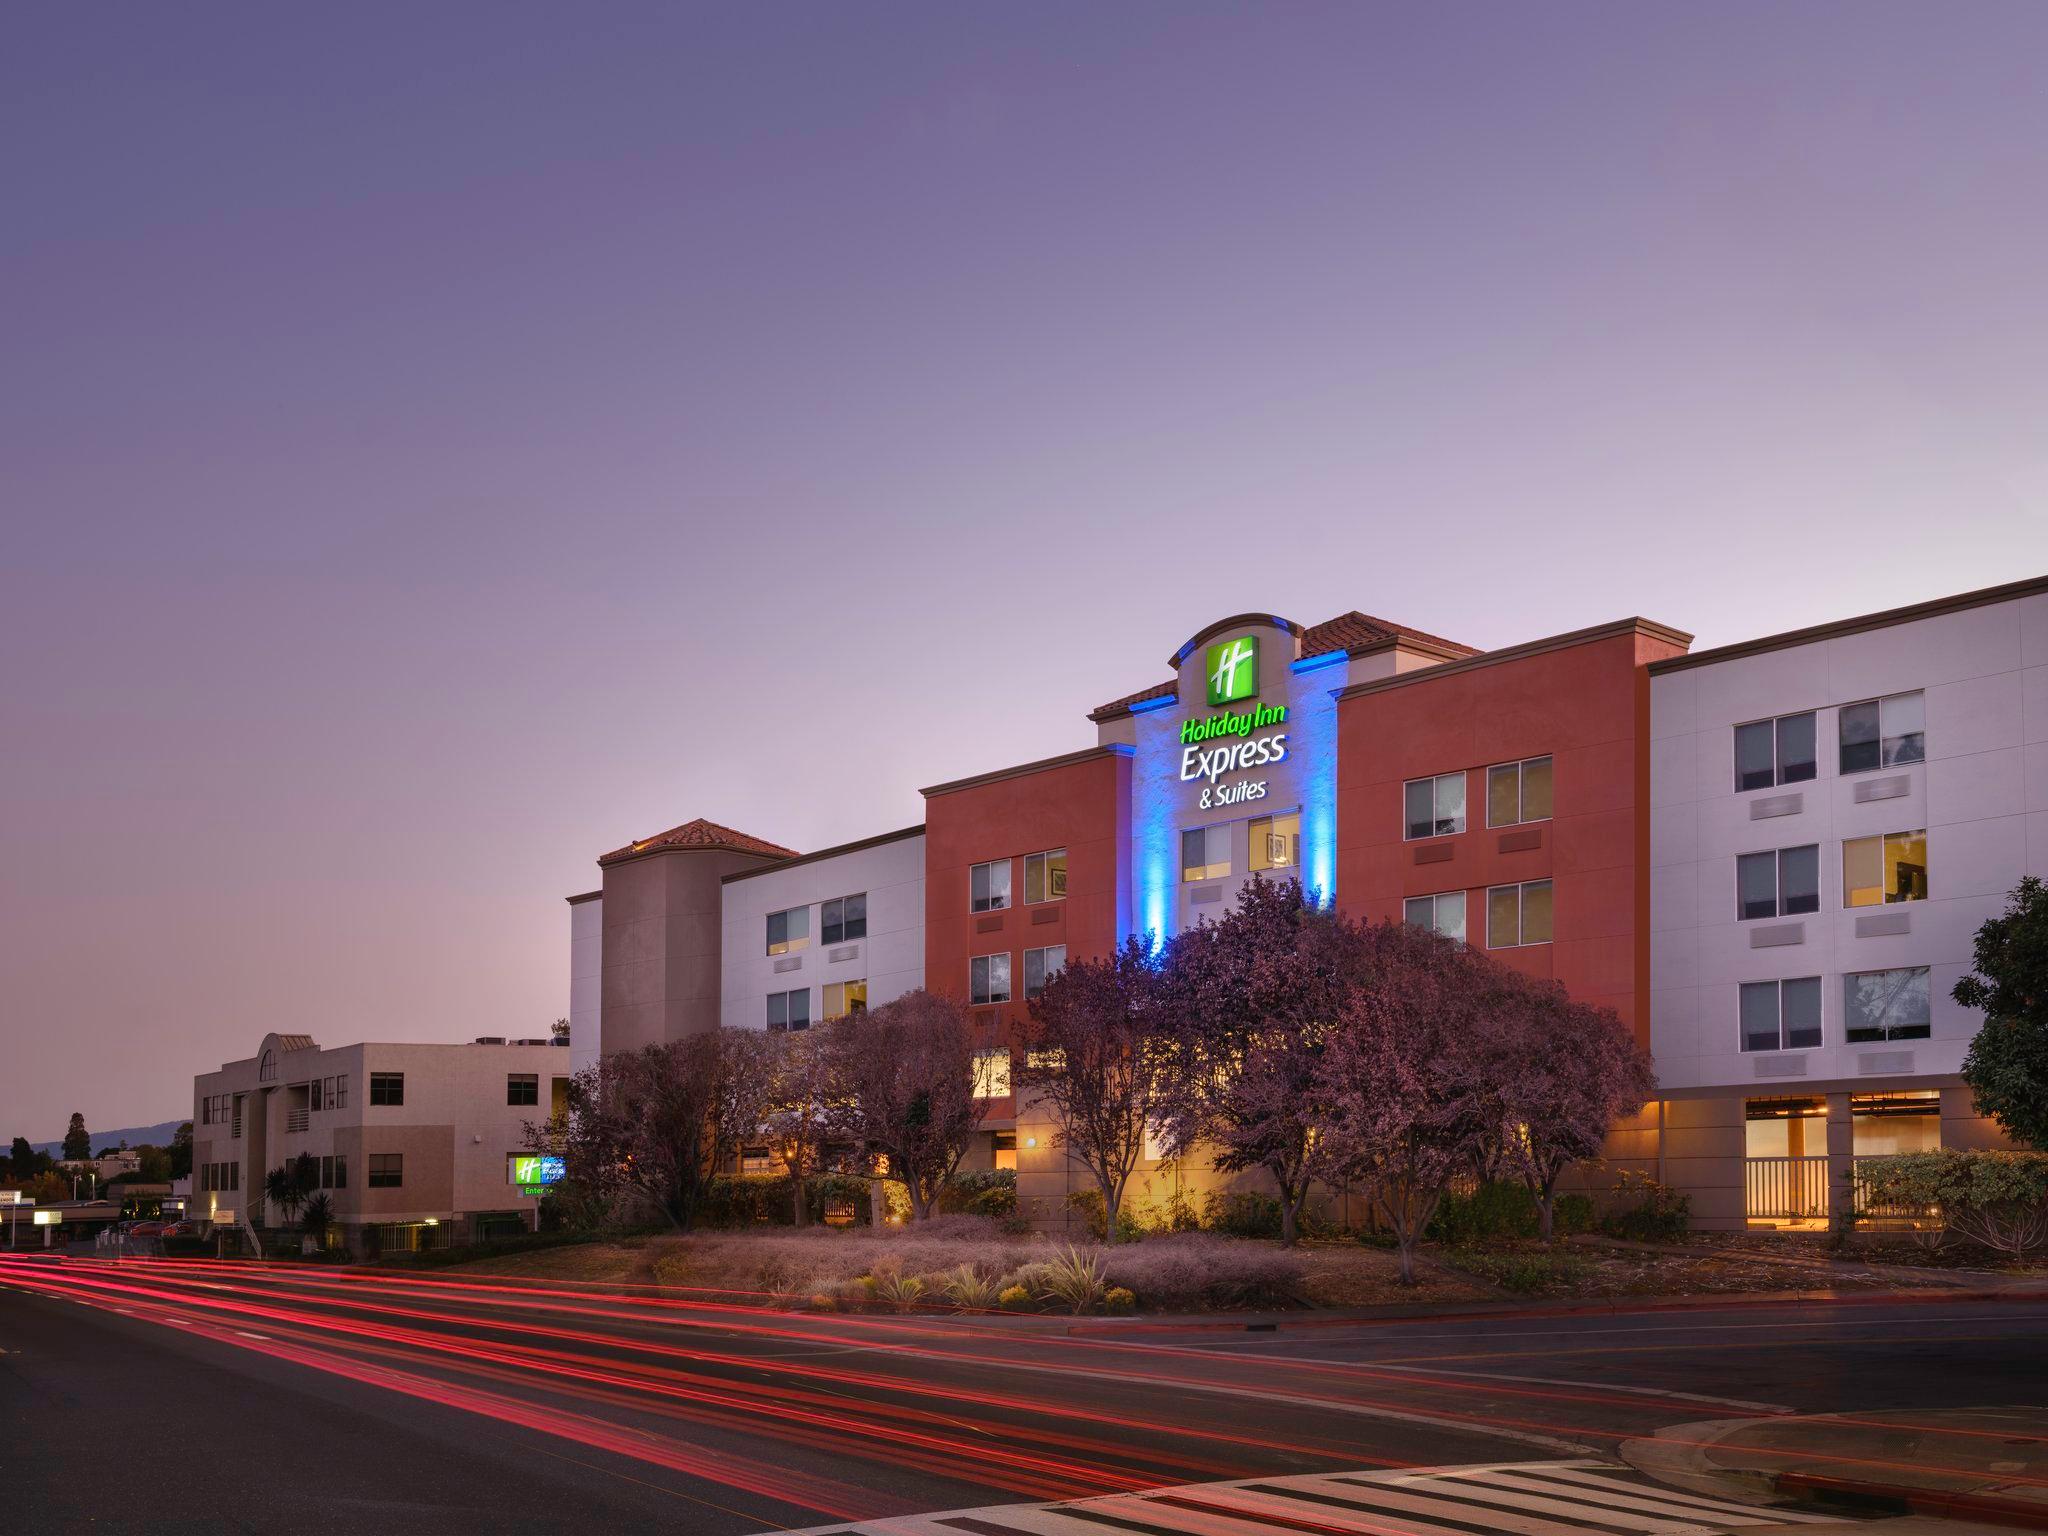 Holiday Inn Express Hotel & Suites Belmont in Belmont, CA